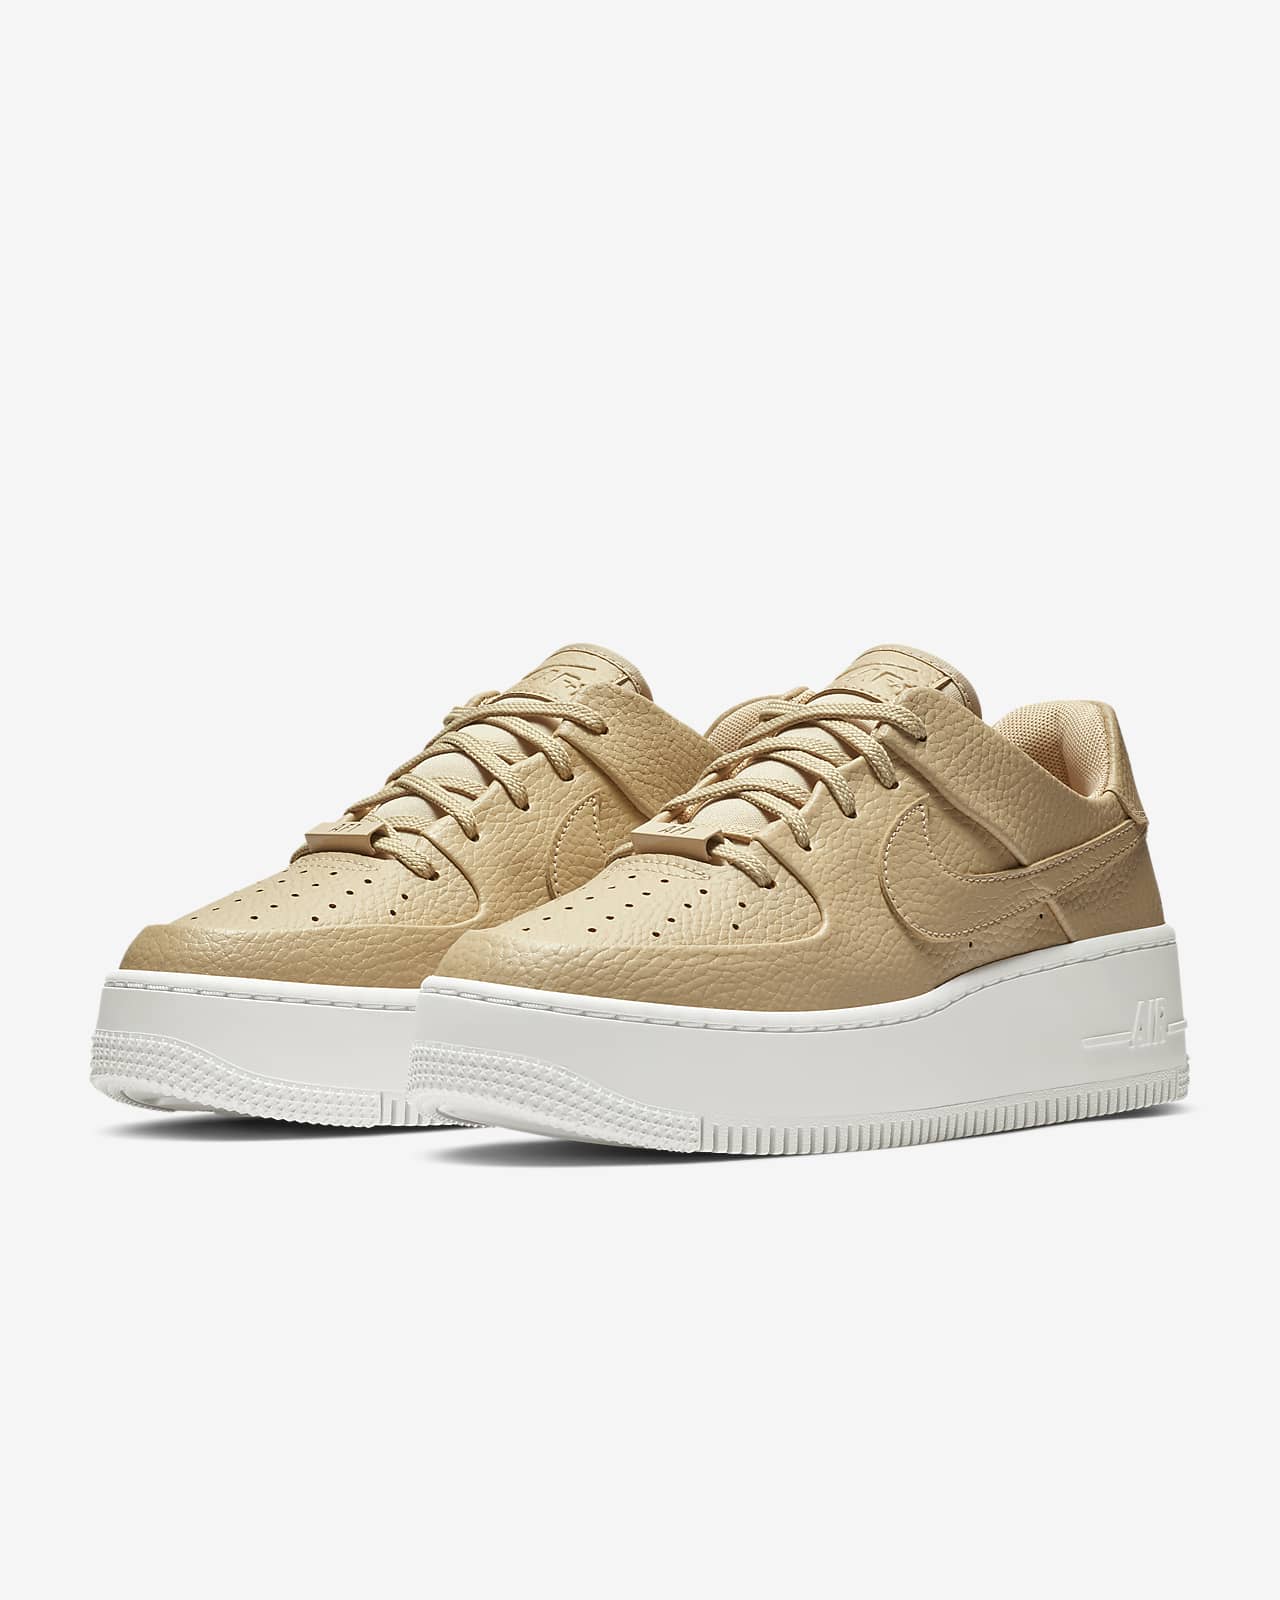 nike women's air force 1 sage low shoes